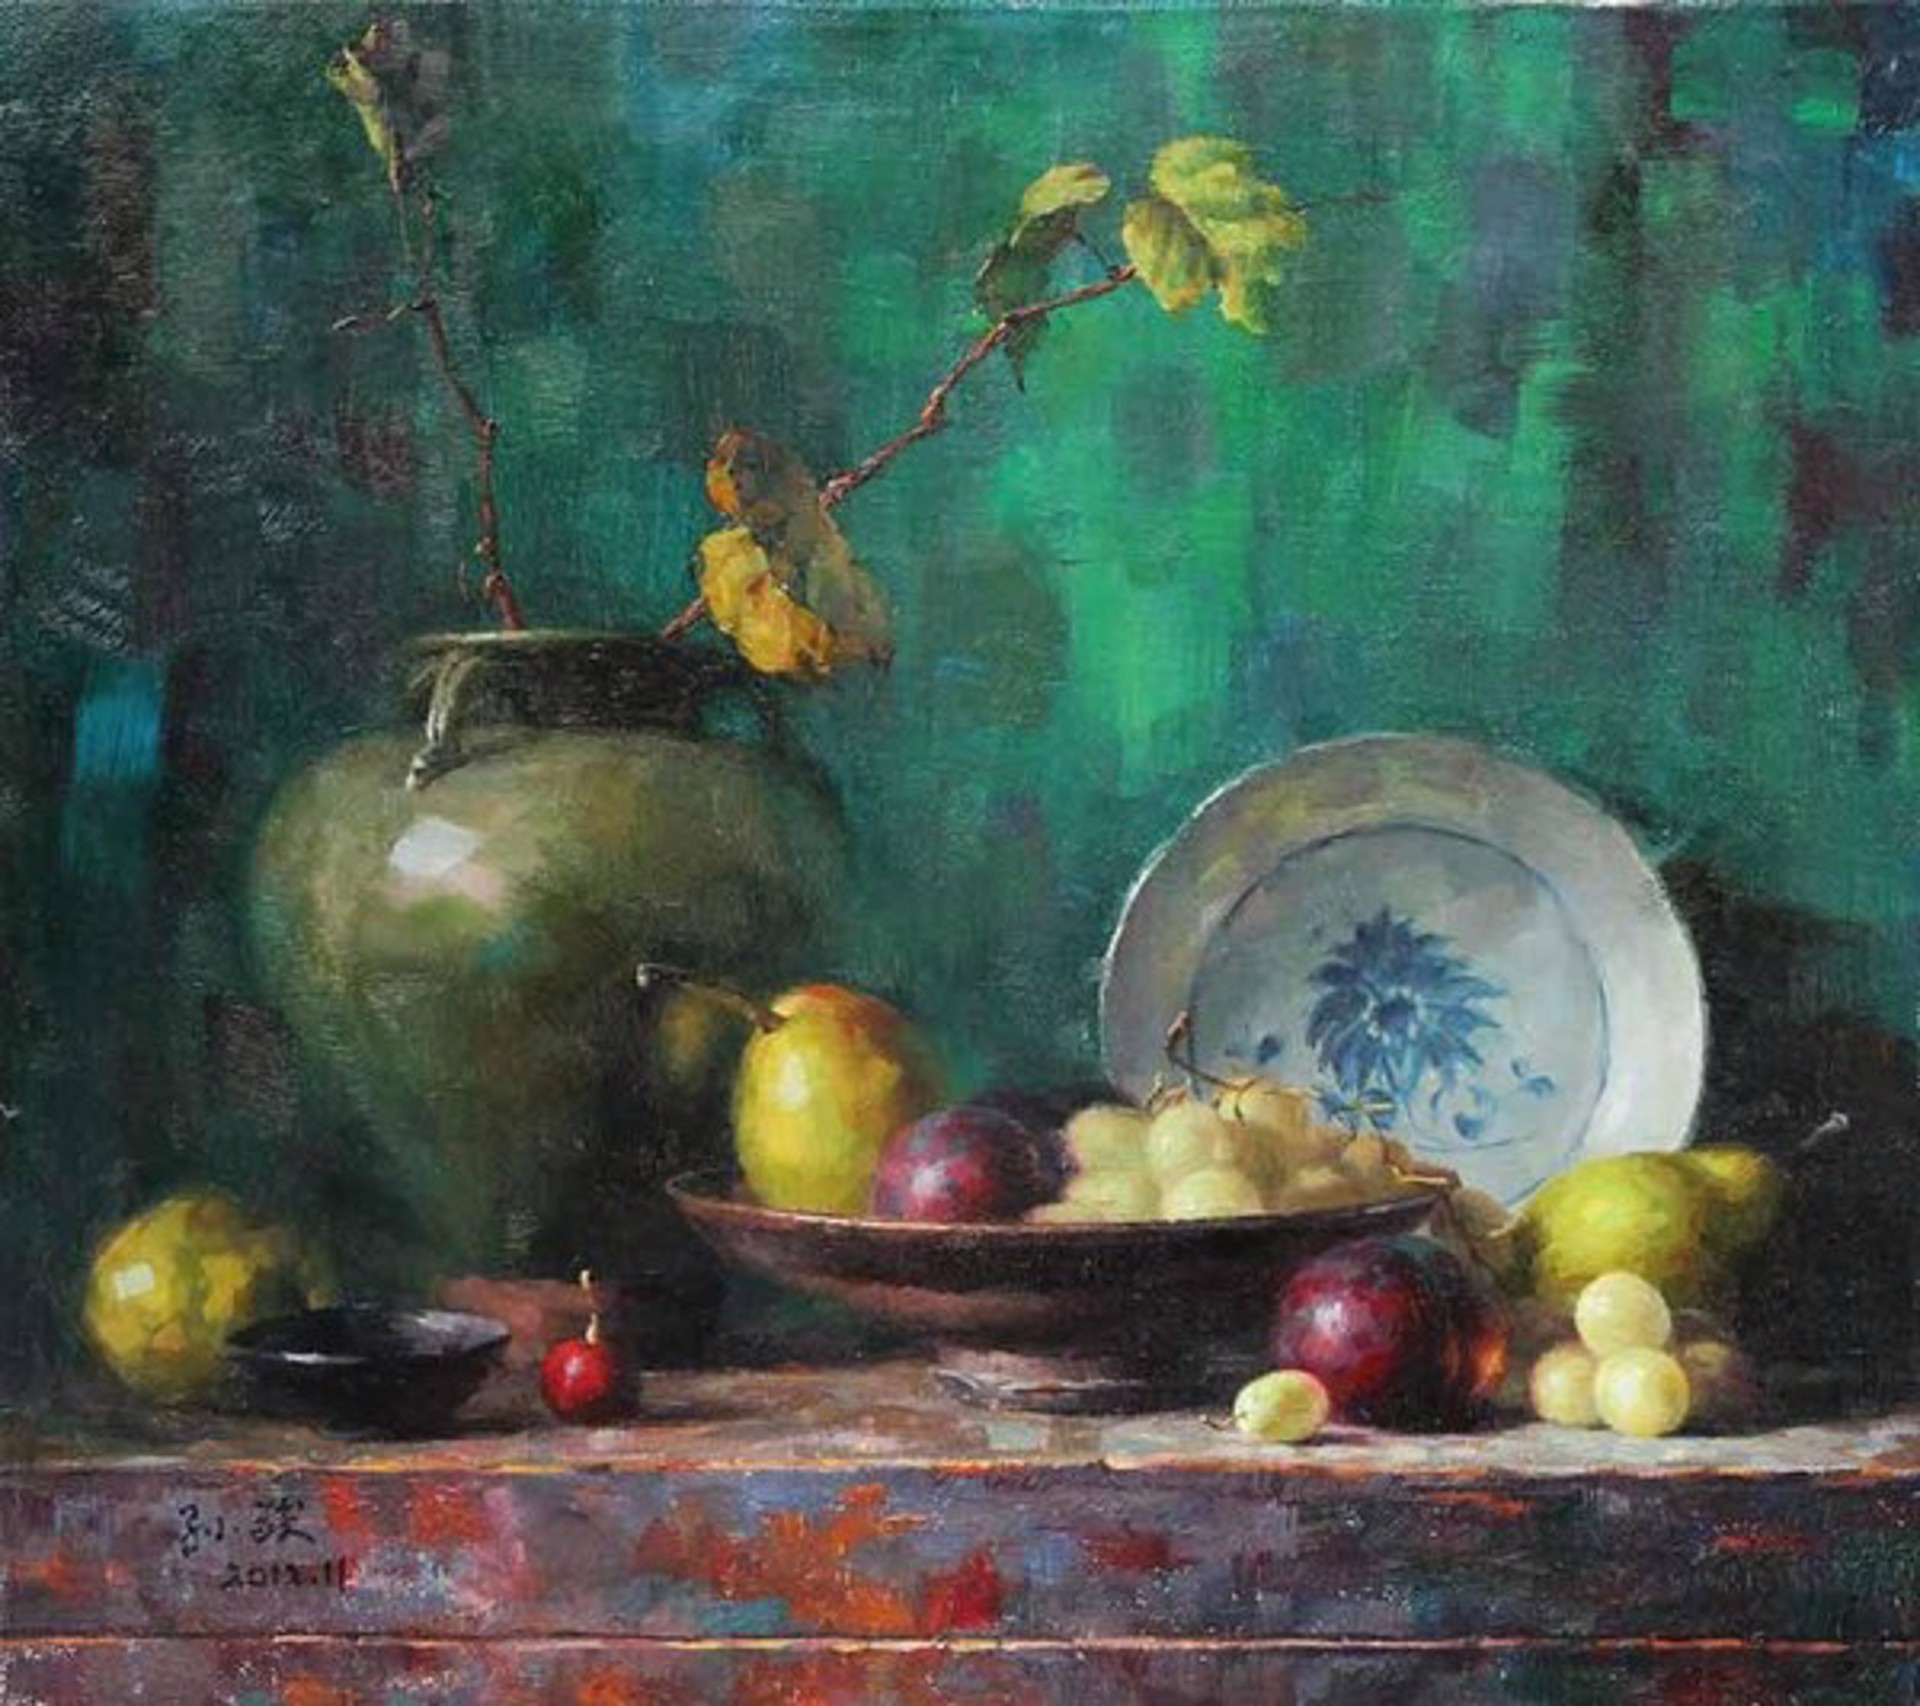 Grapes and Plums by Sun Jun